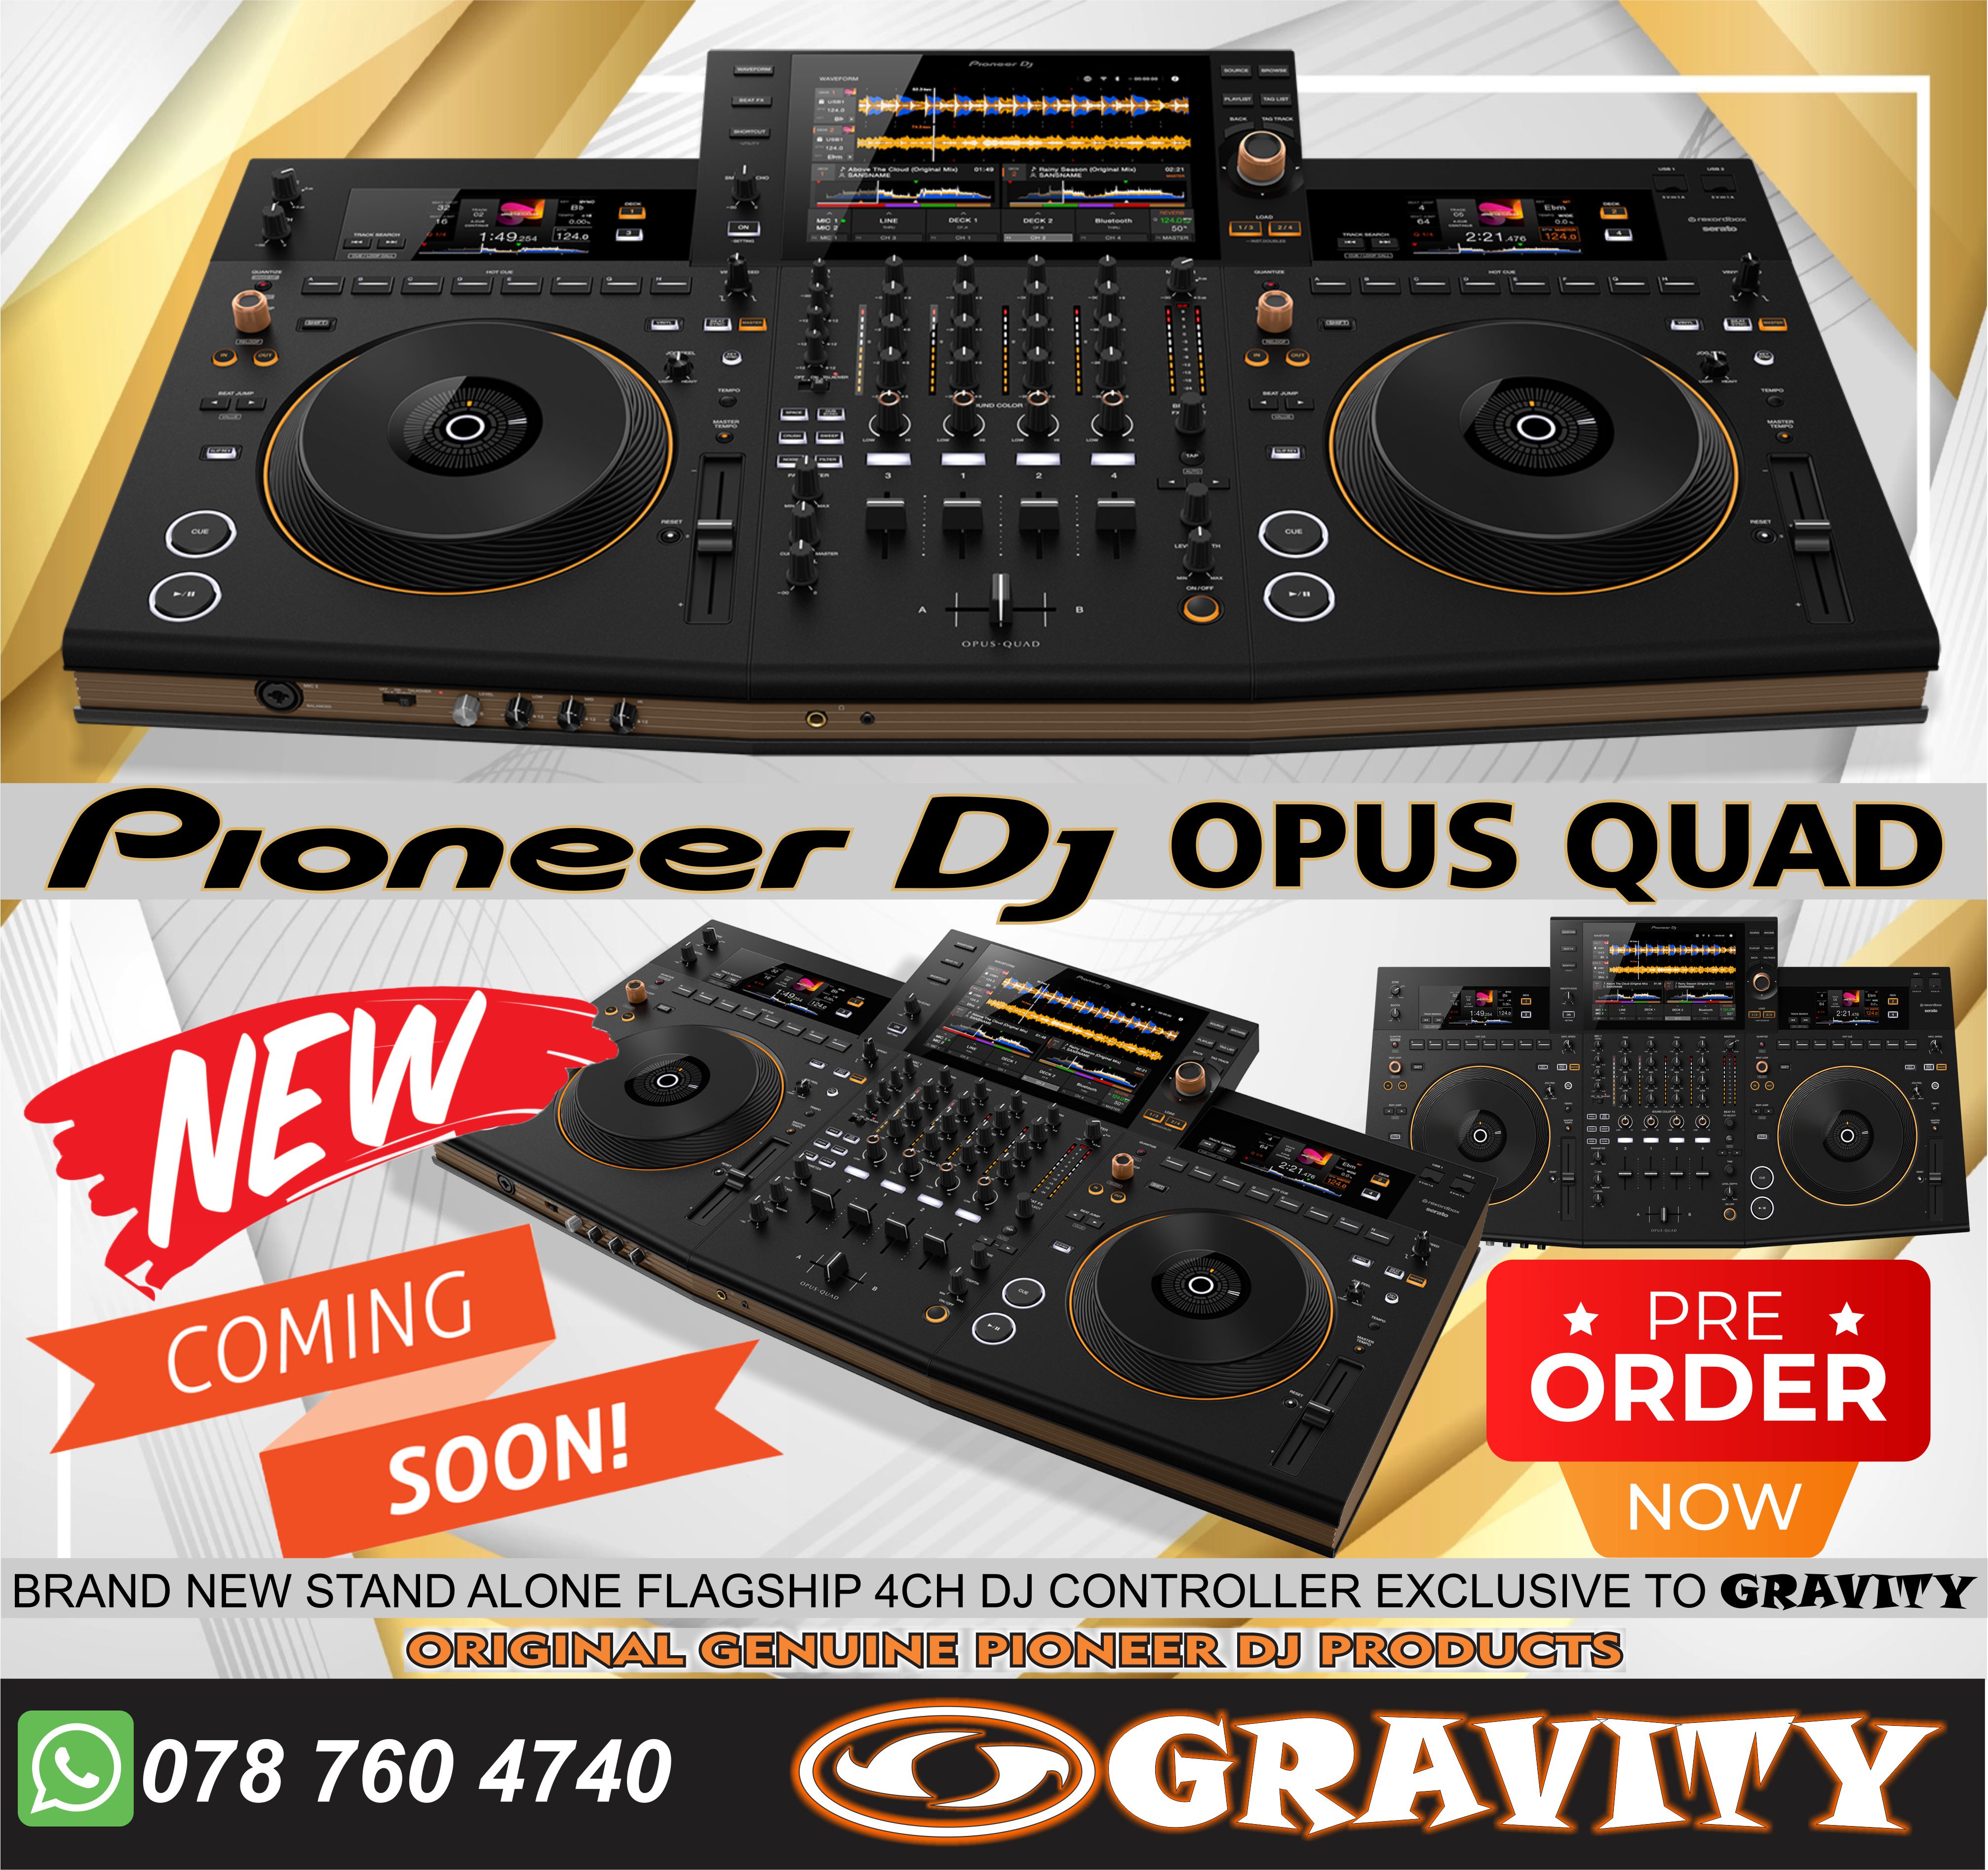 pioneer dj opus quad | 4ch pioneer dj controller with built in cdj 3000 layout and djm-a9 4ch dj mixer | pioneer dj opus dj controller gravity durban